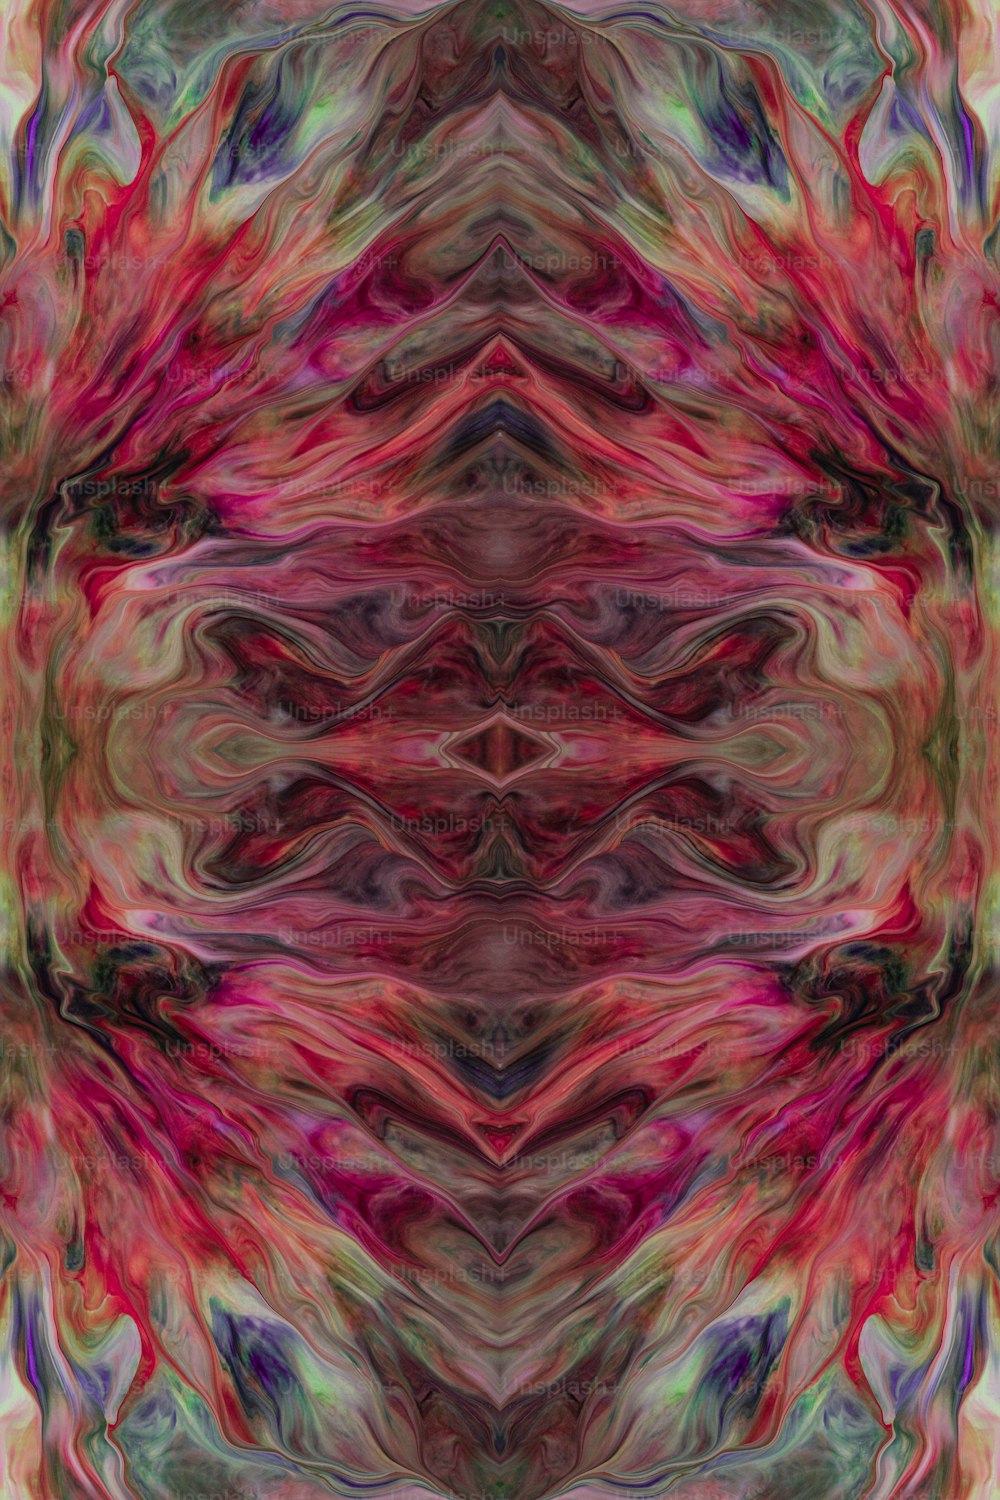 an abstract image of a colorful pattern